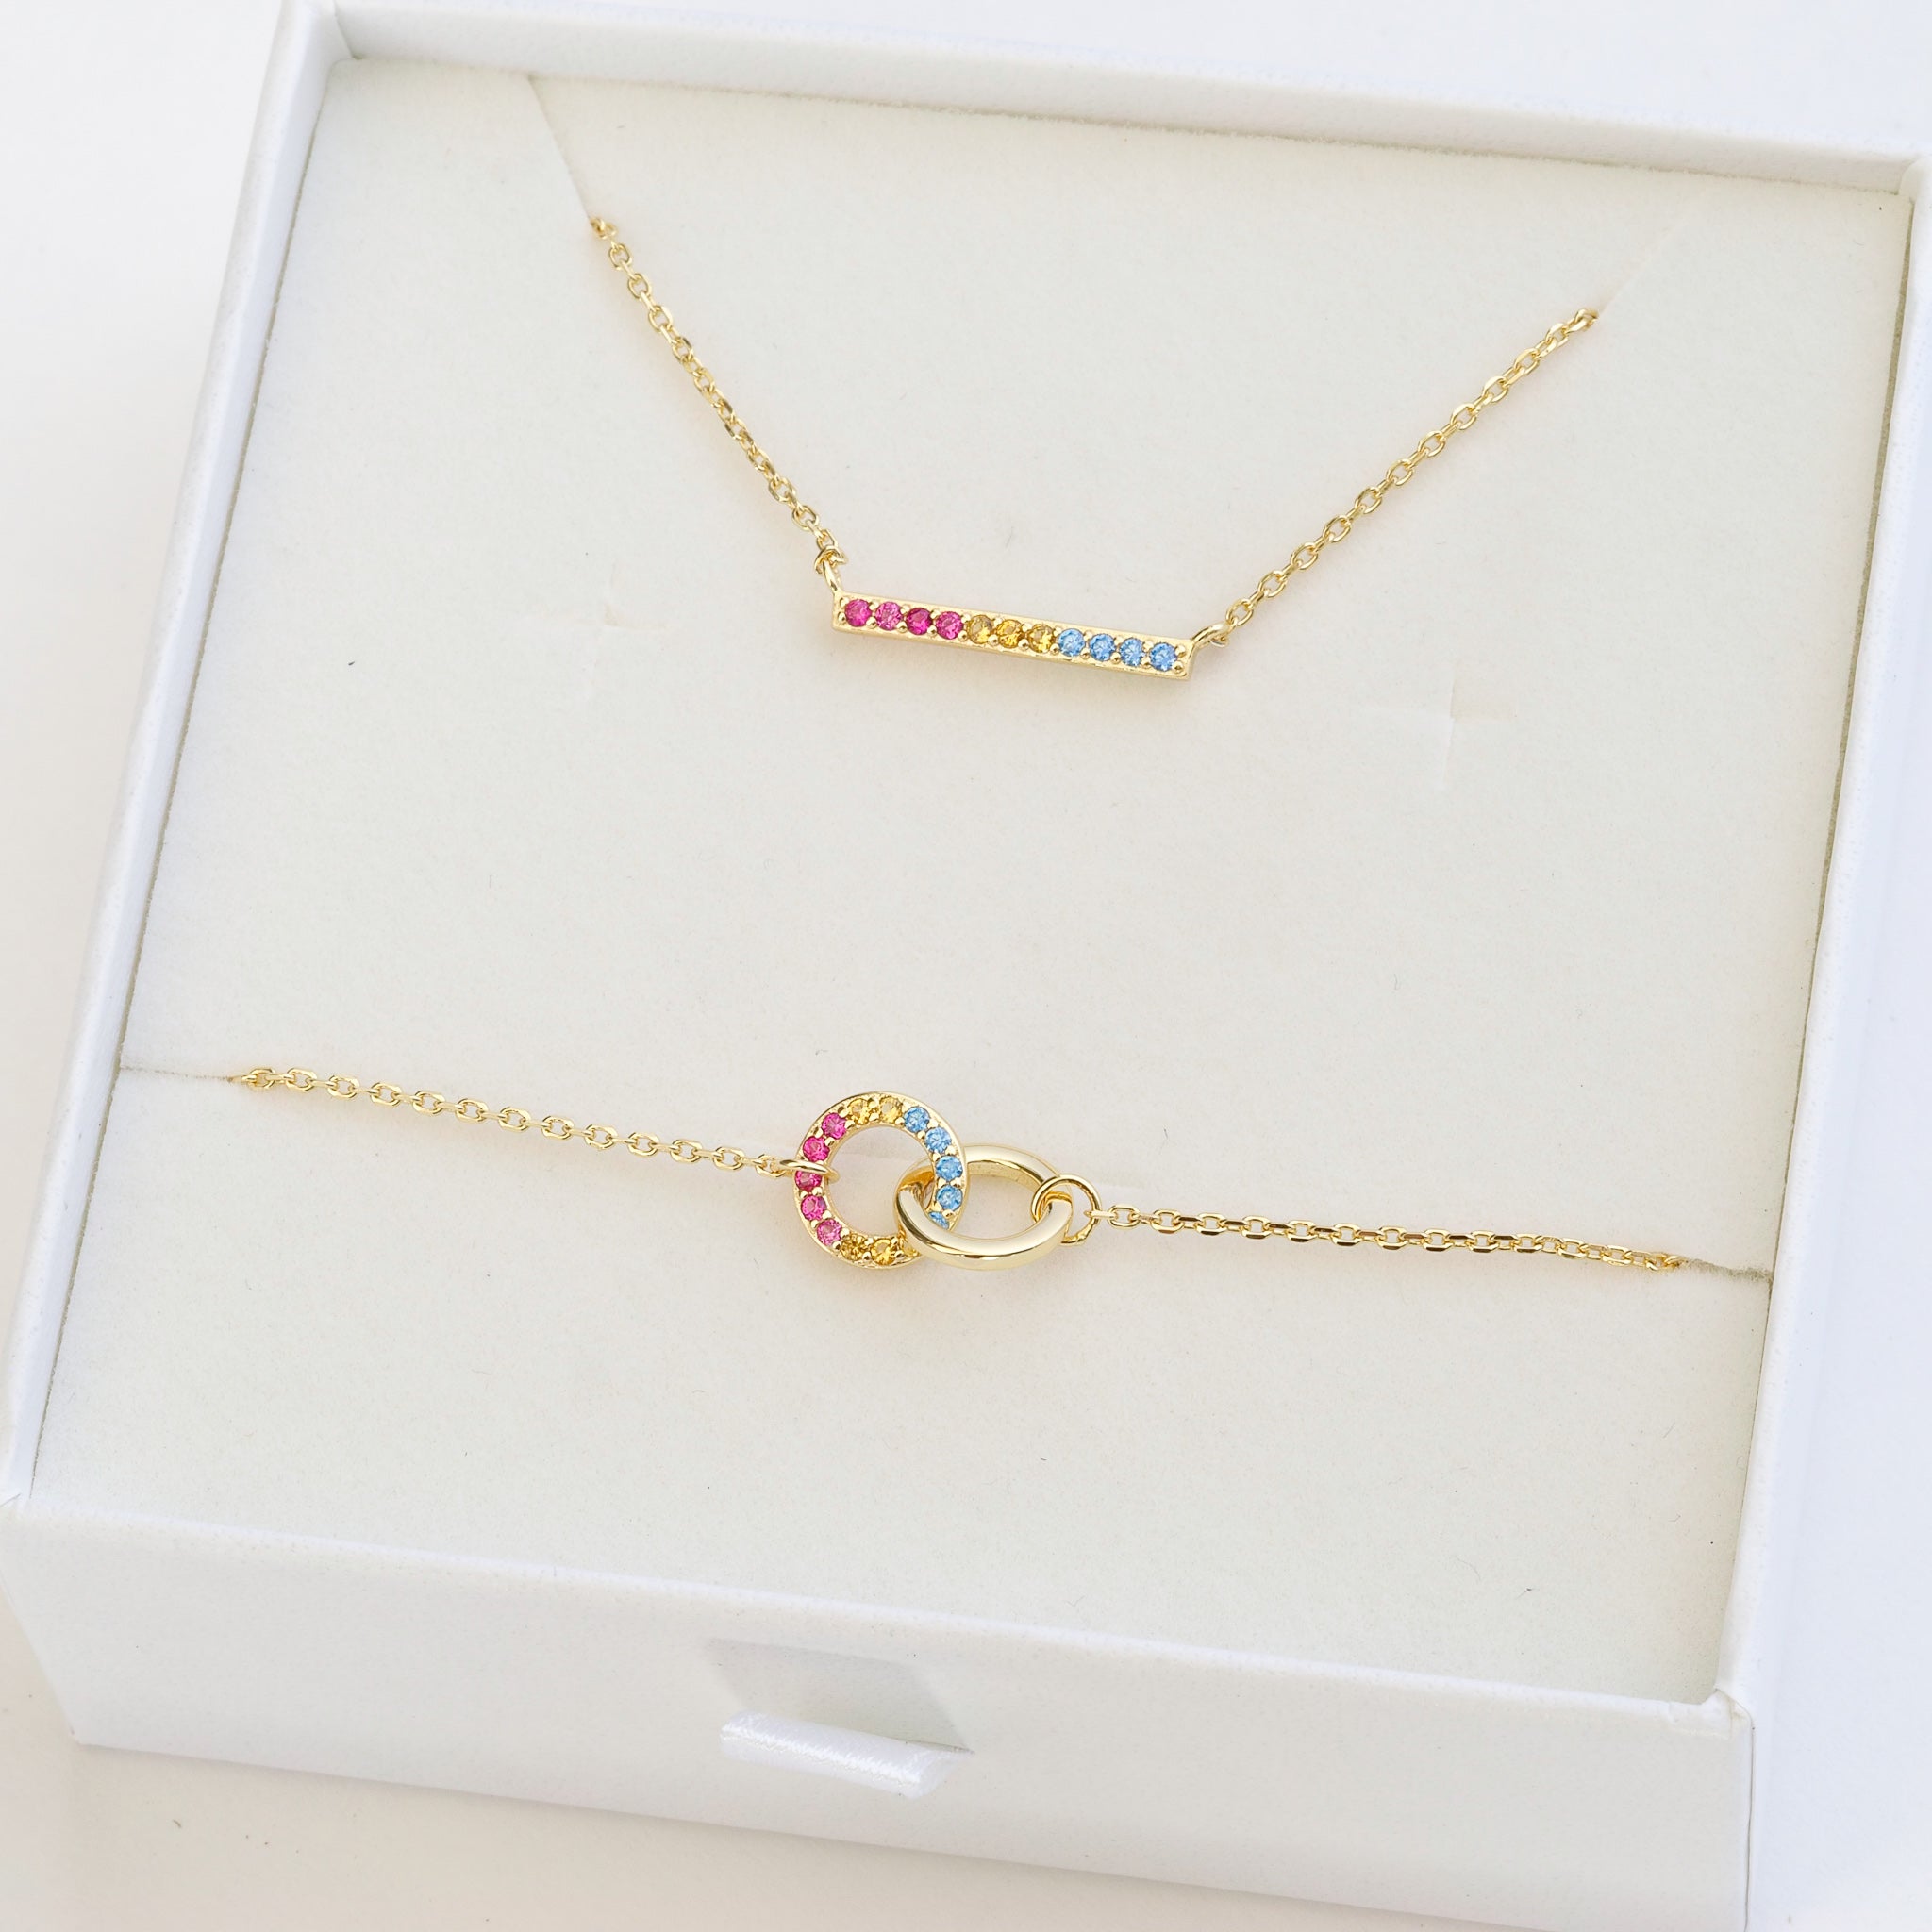 pansexual flag jewellery set with pansexual necklace and pansexual bracelet - gold